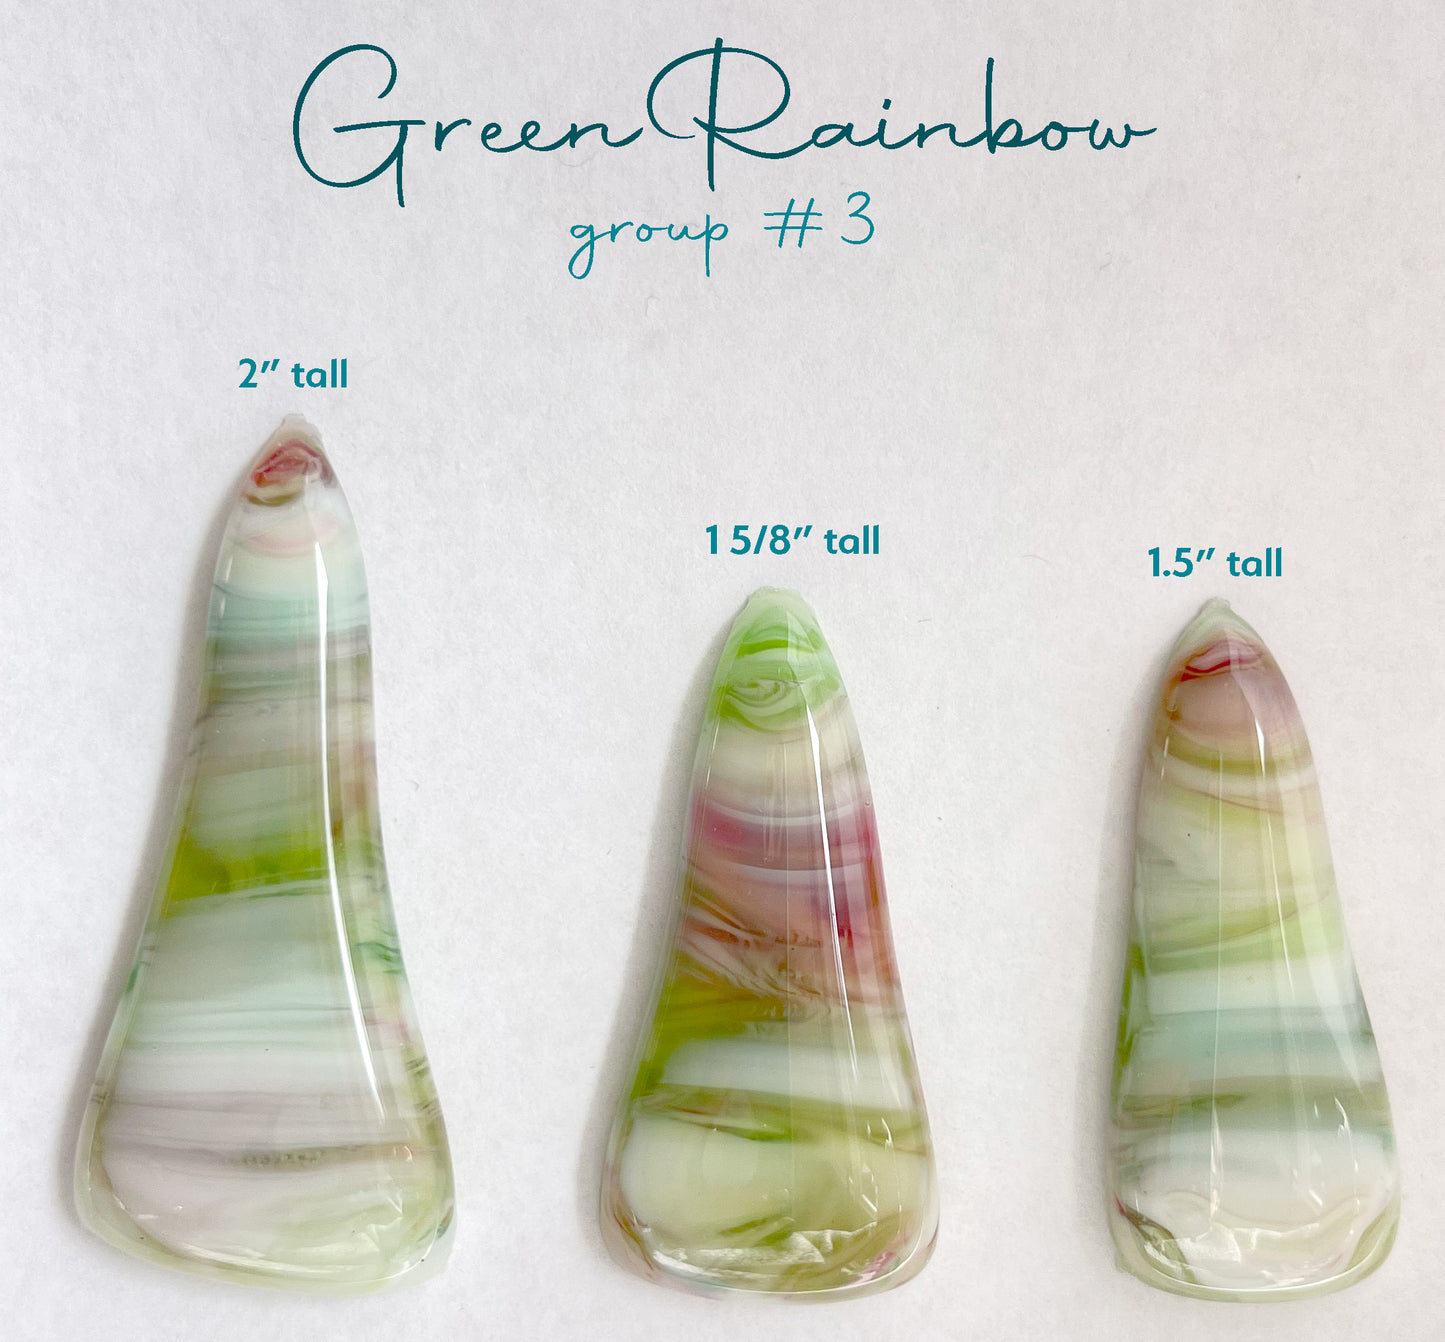 Handmade Stained Glass Cabochons - Green Rainbow Glass